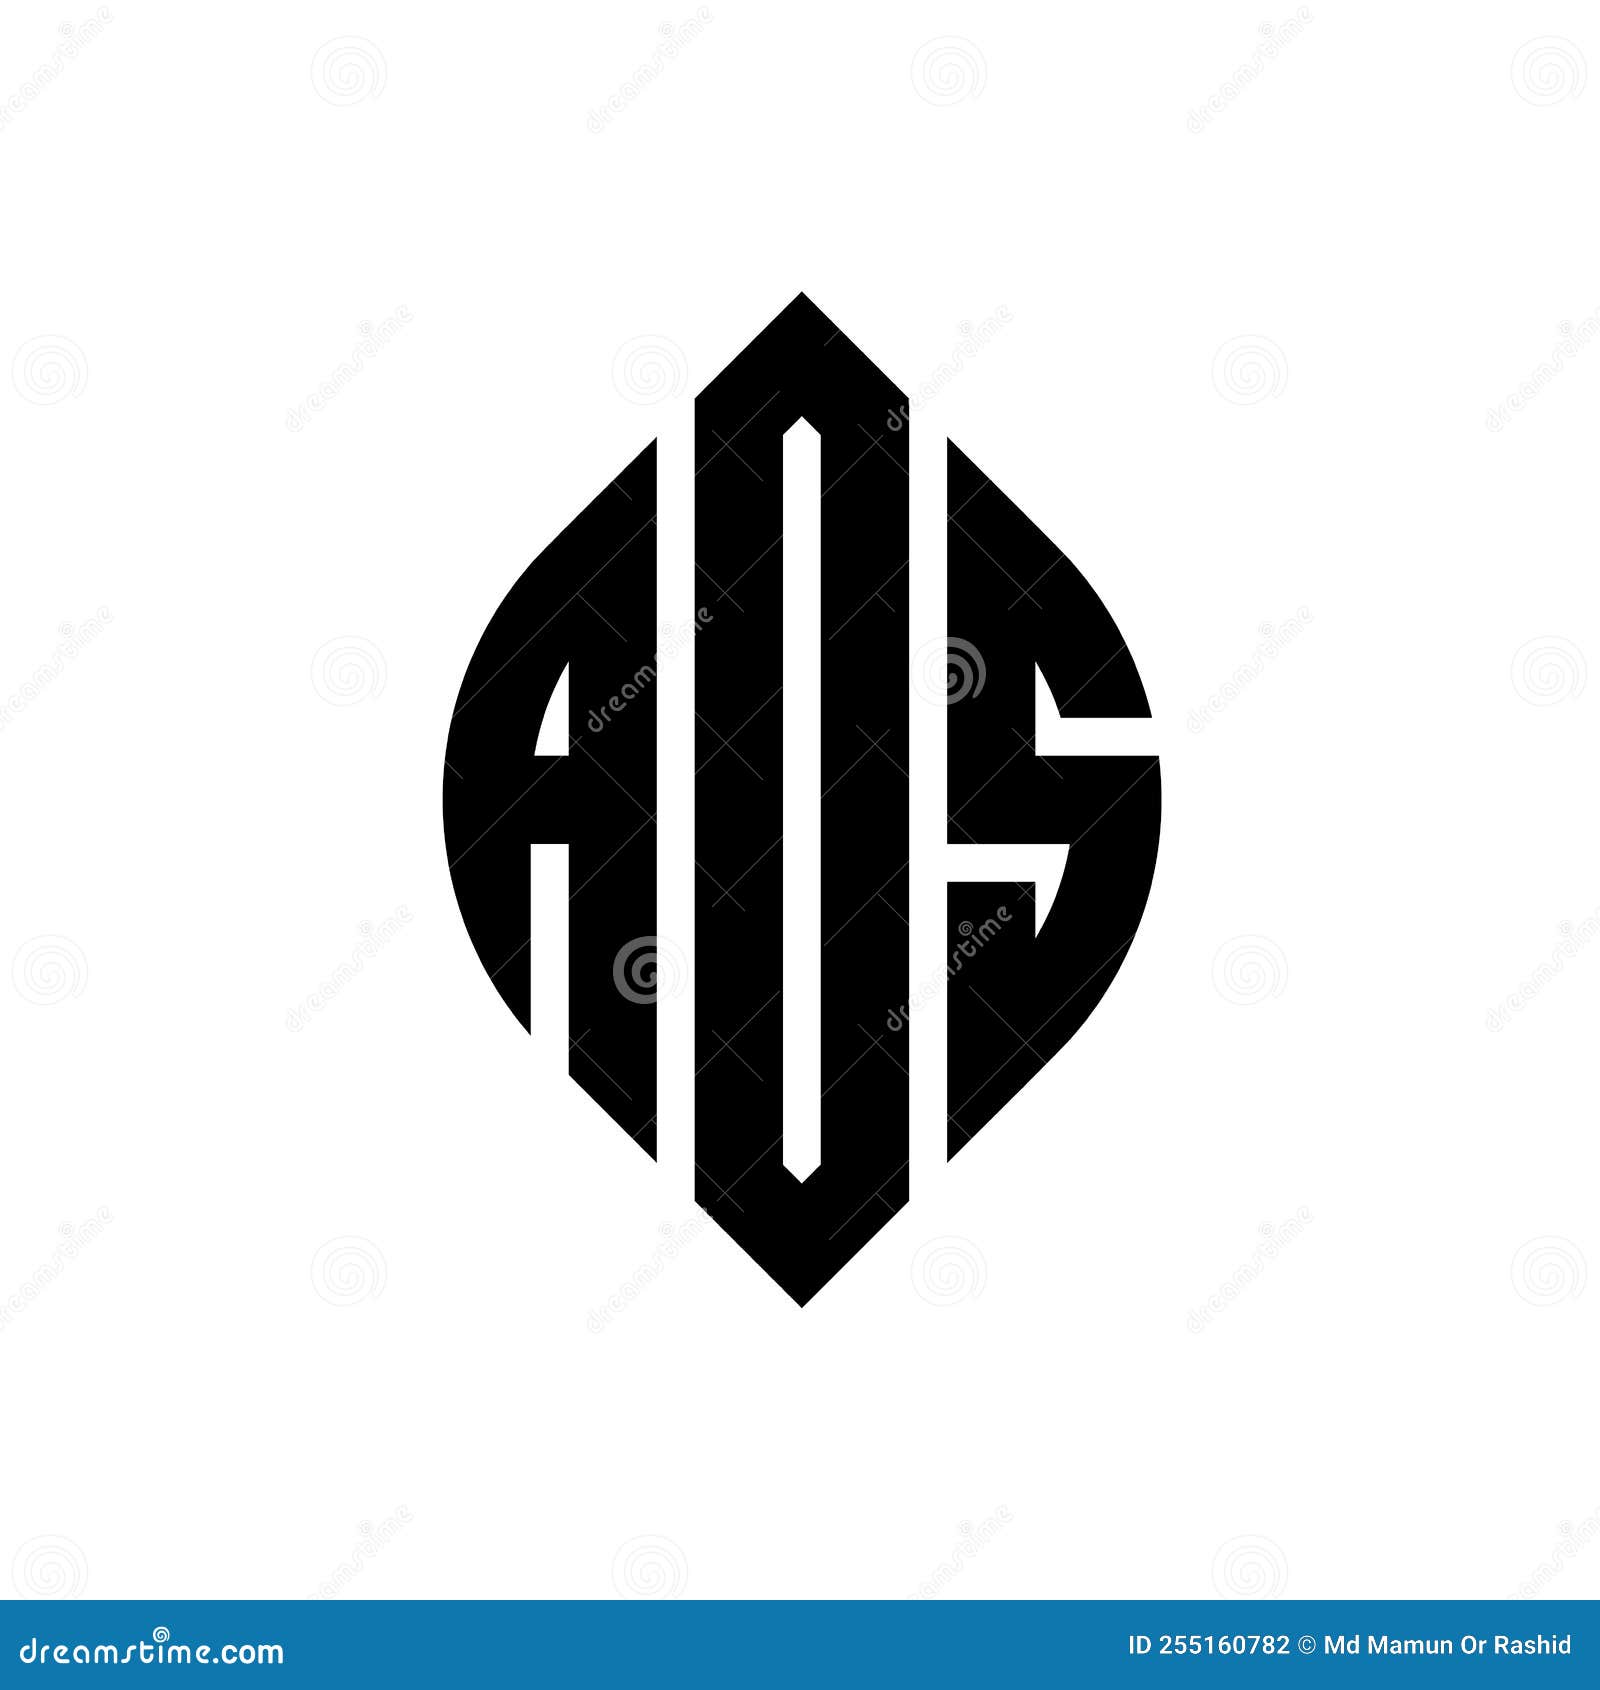 aos circle letter logo  with circle and ellipse . aos ellipse letters with typographic style. the three initials form a